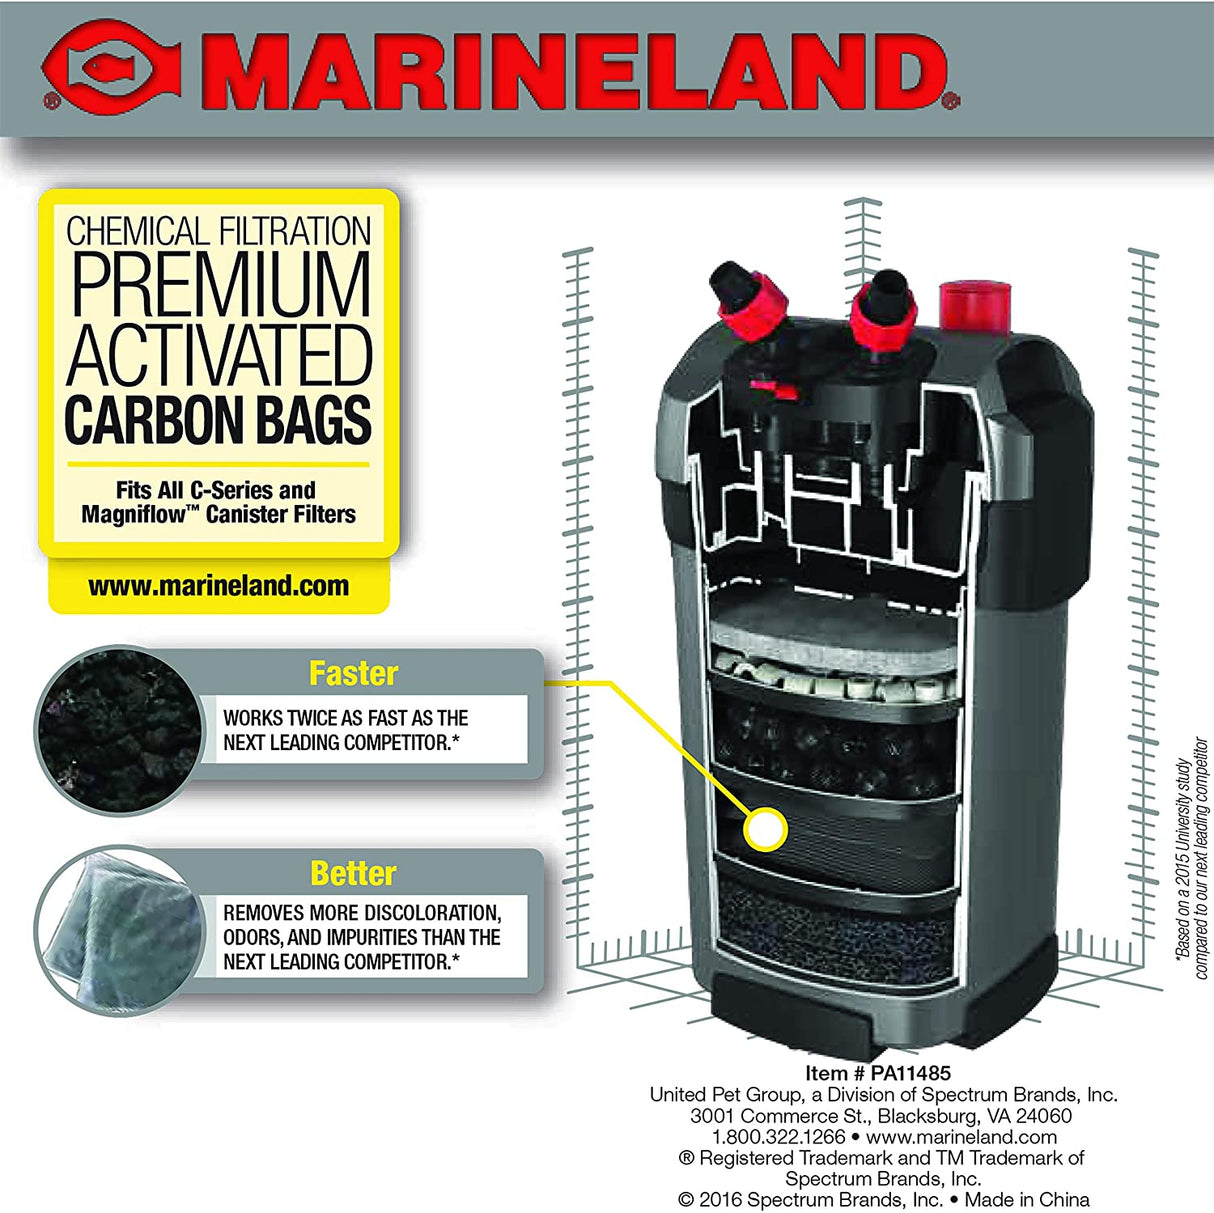 24 count (12 x 2 ct) Marineland Rite-Size Premium Activated Carbon Bags for All Magniflow and C-Series Canister Filters